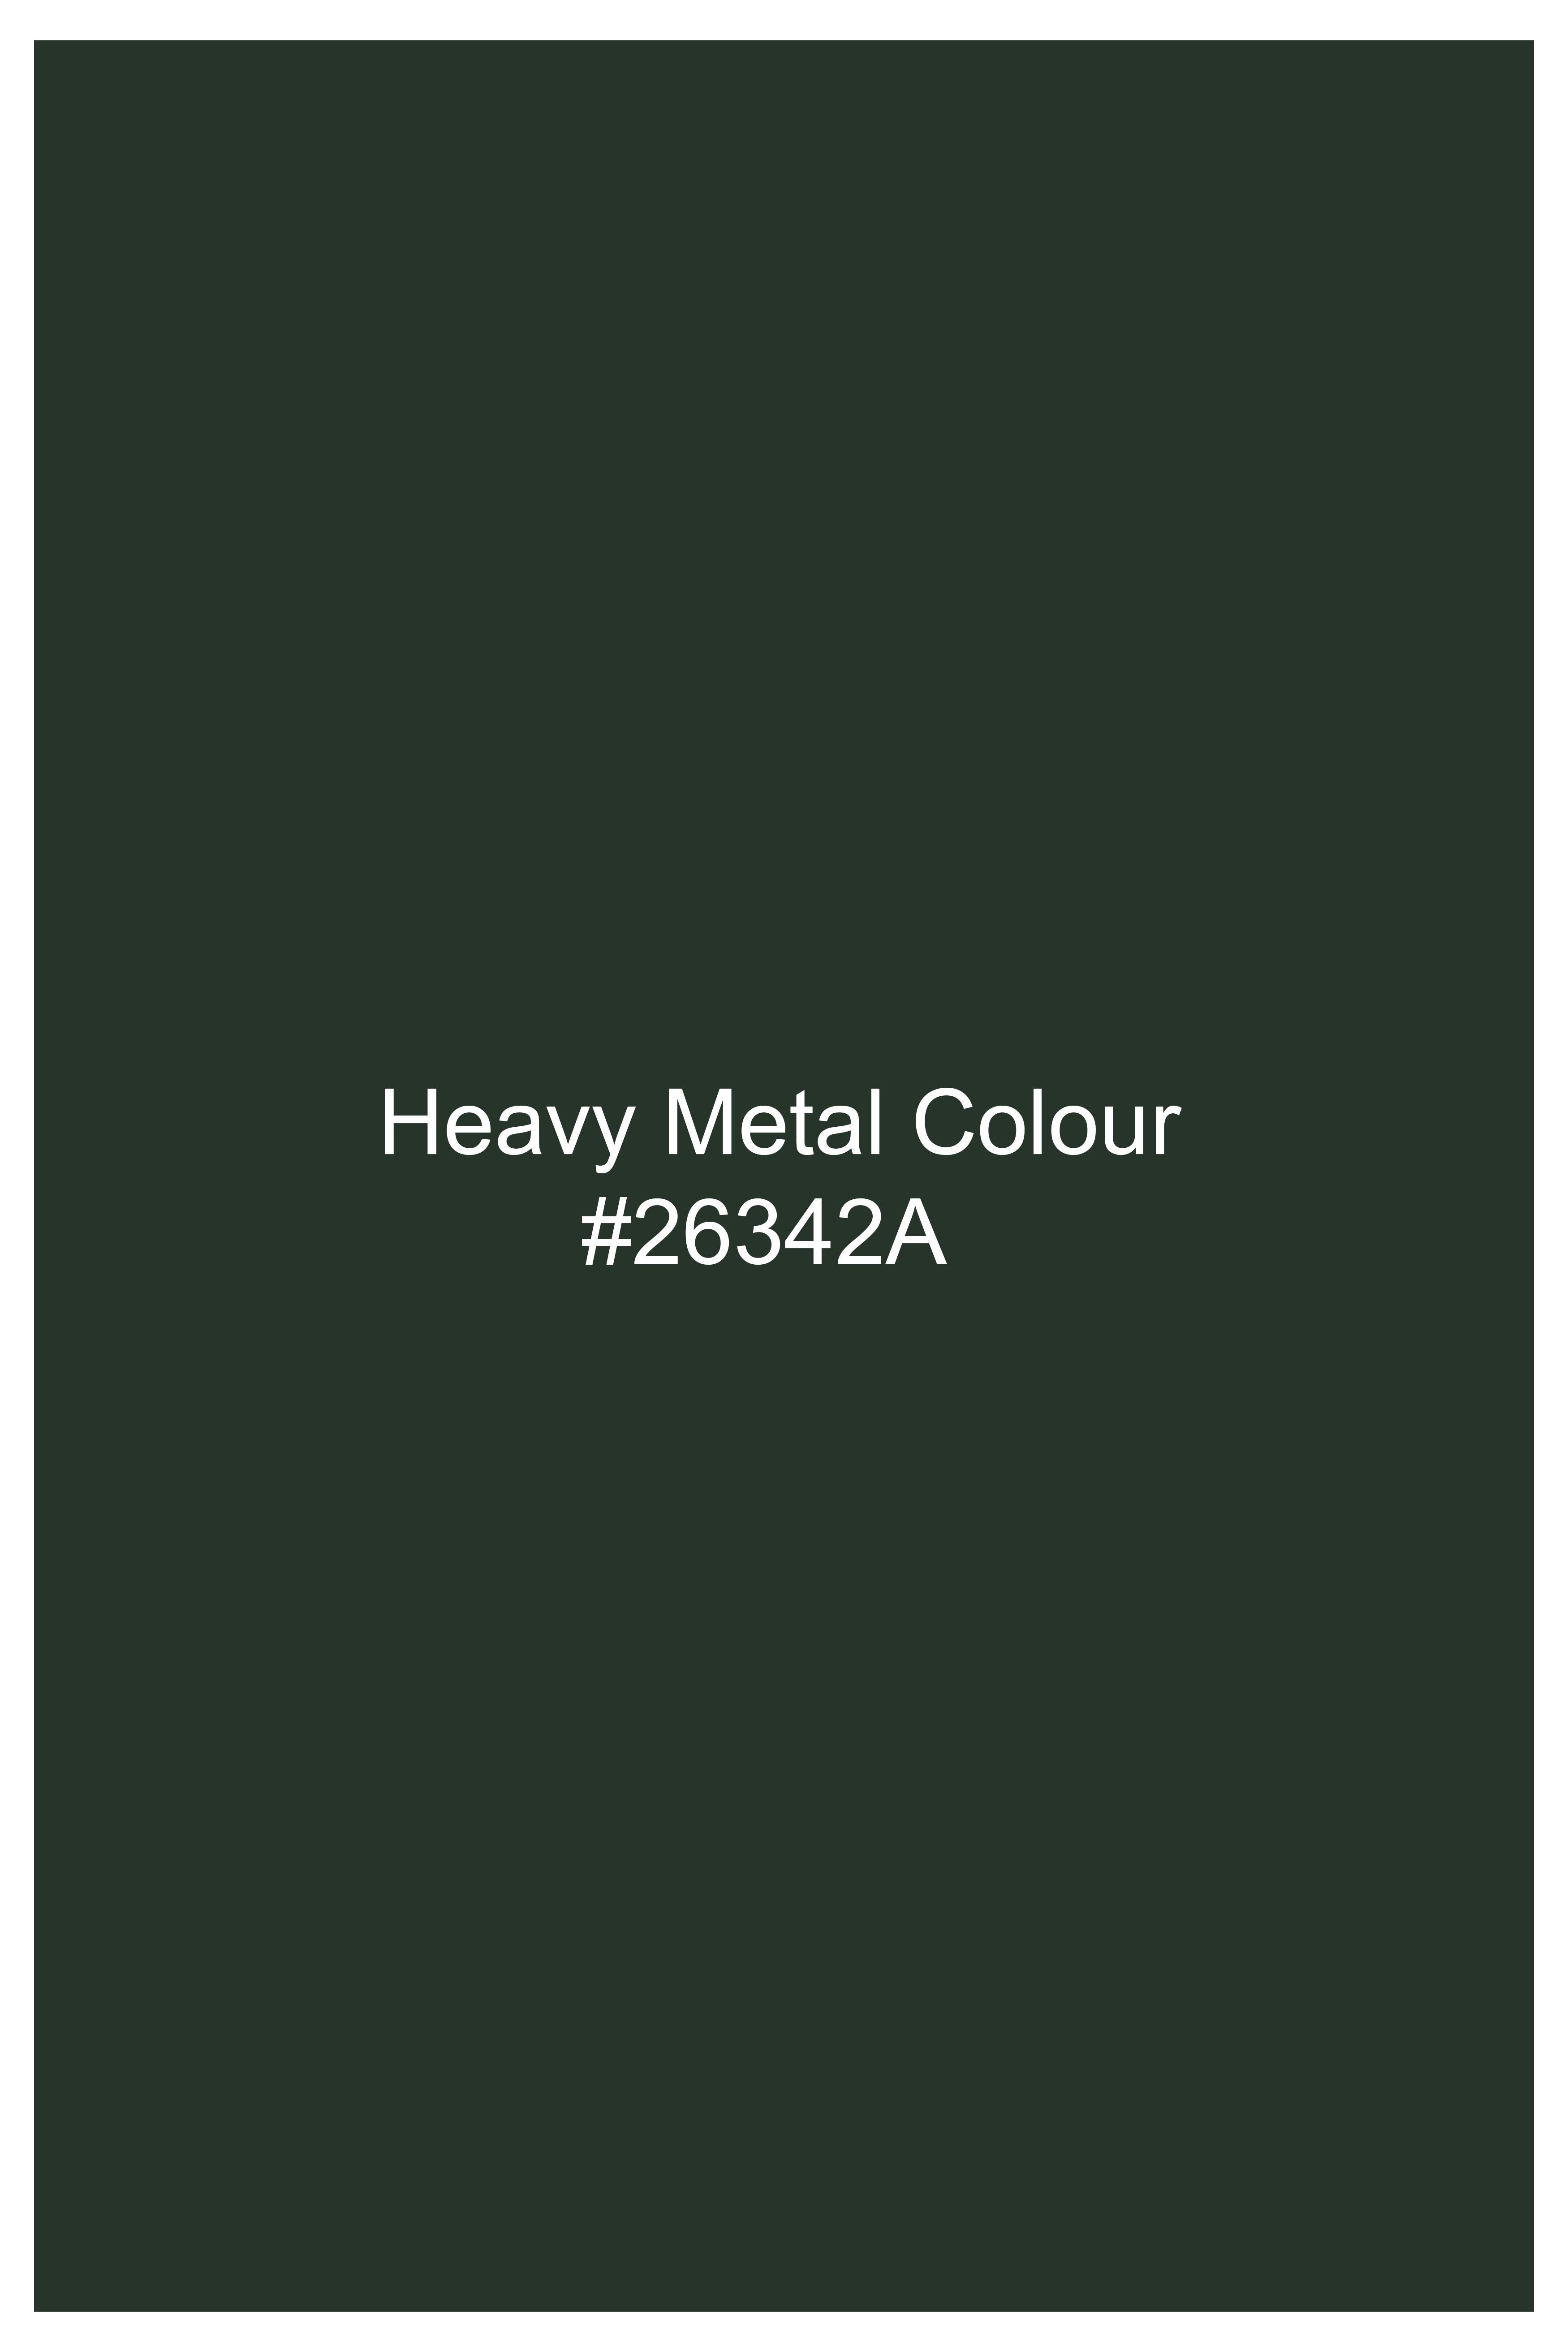 Heavy Metal Green Double Breasted Premium Cotton Stretchable Traveler Suit ST2773-DB-36,ST2773-DB-38,ST2773-DB-40,ST2773-DB-42,ST2773-DB-44,ST2773-DB-46,ST2773-DB-48,ST2773-DB-50,ST2773-DB-52,ST2773-DB-54,ST2773-DB-56,ST2773-DB-58,ST2773-DB-60